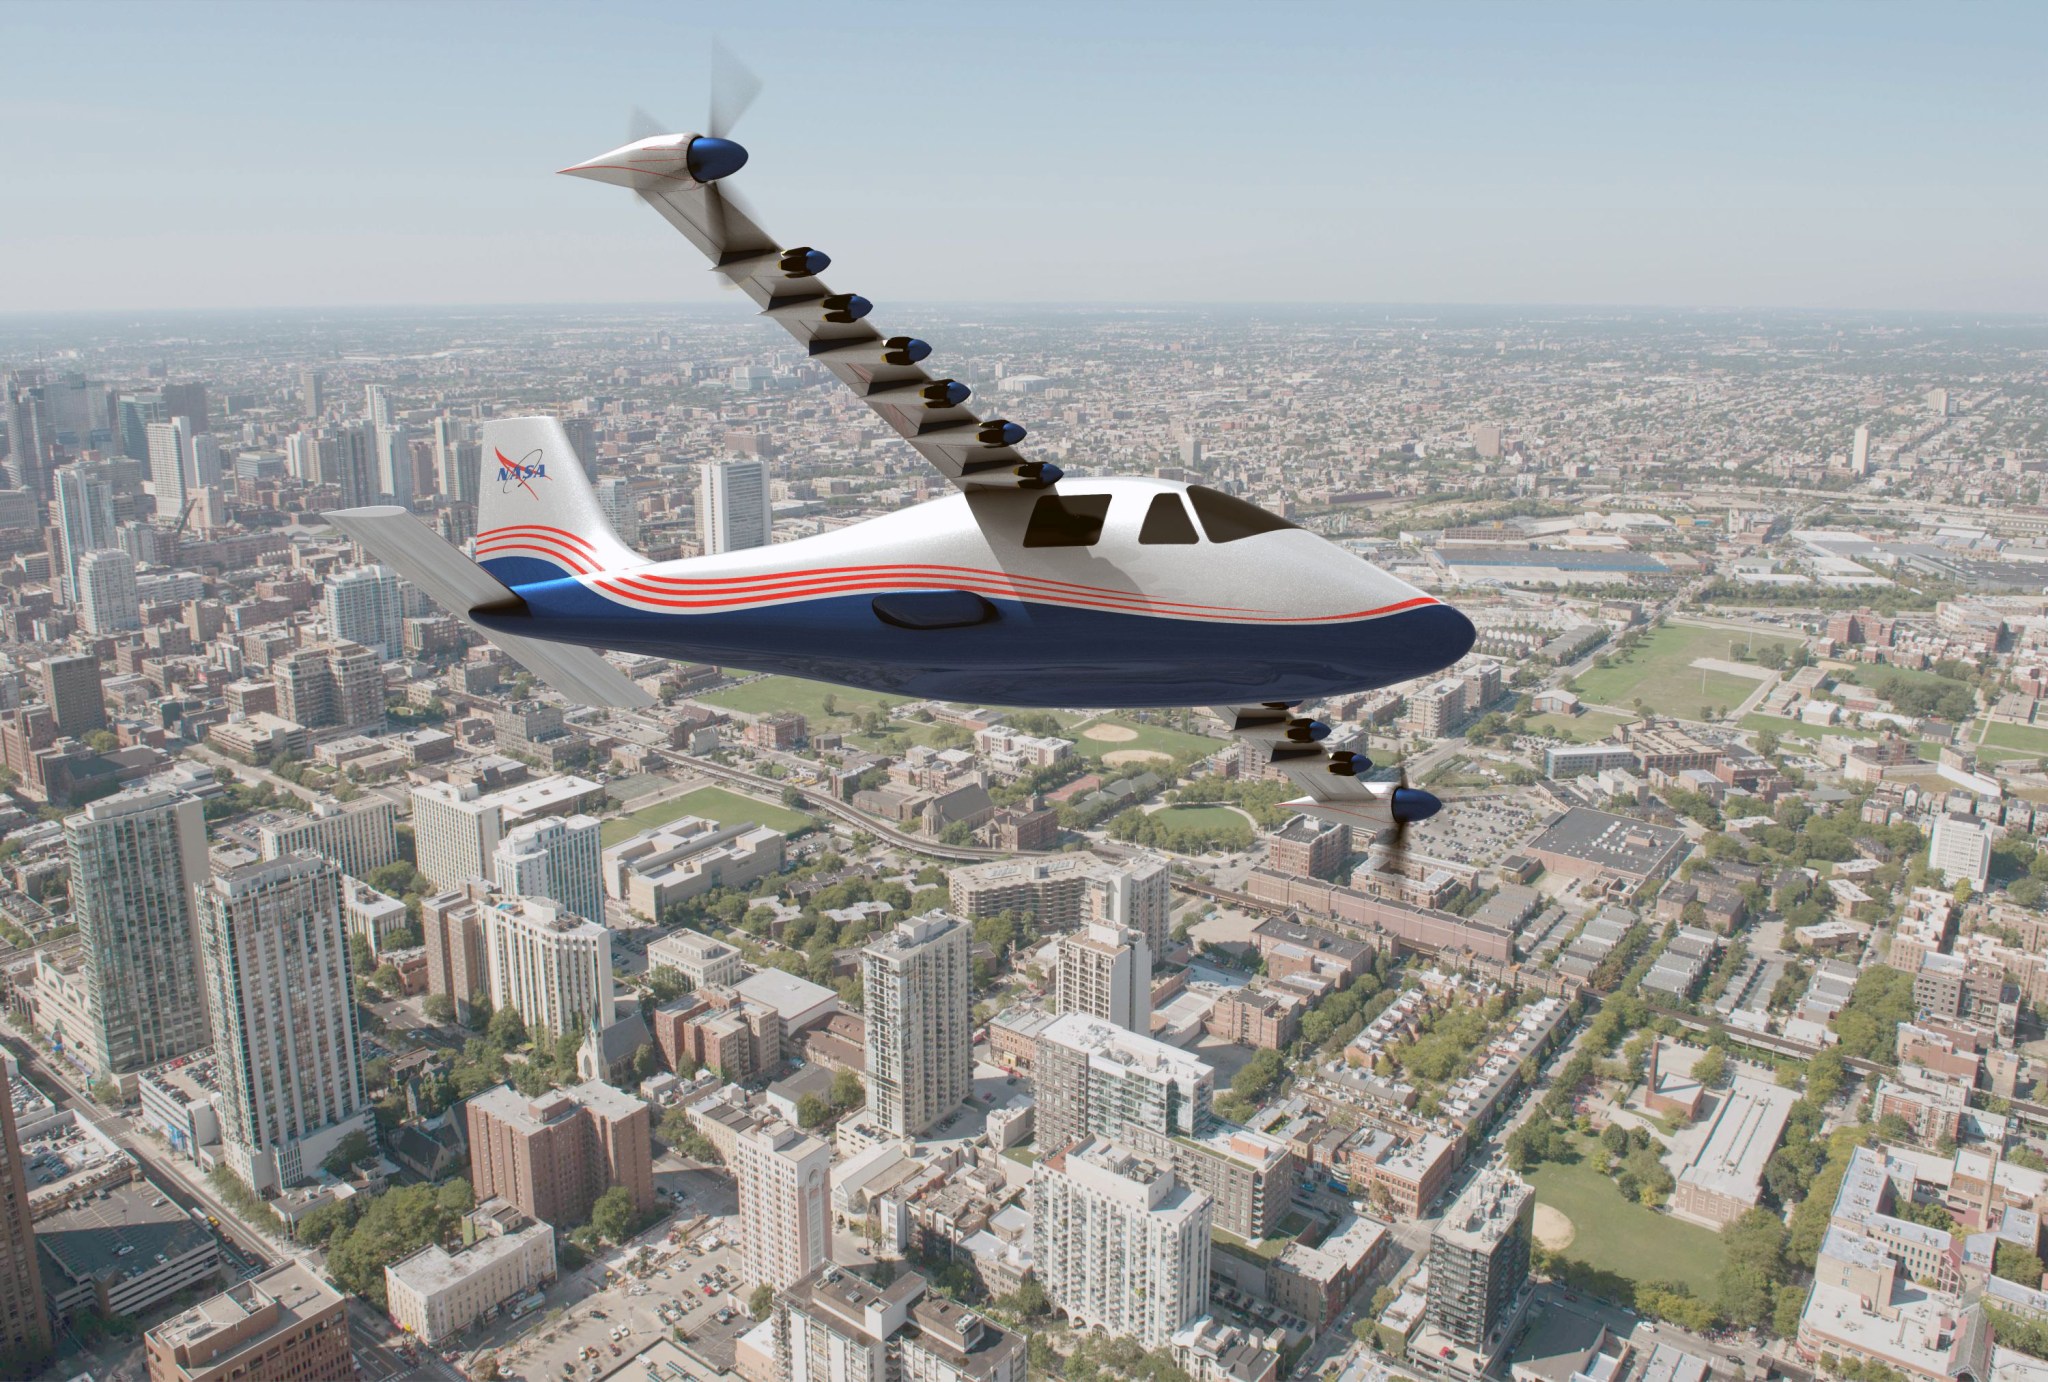 An artist’s concept of NASA’s X-57 Maxwell aircraft shows the plane’s specially designed wing and electric motors.